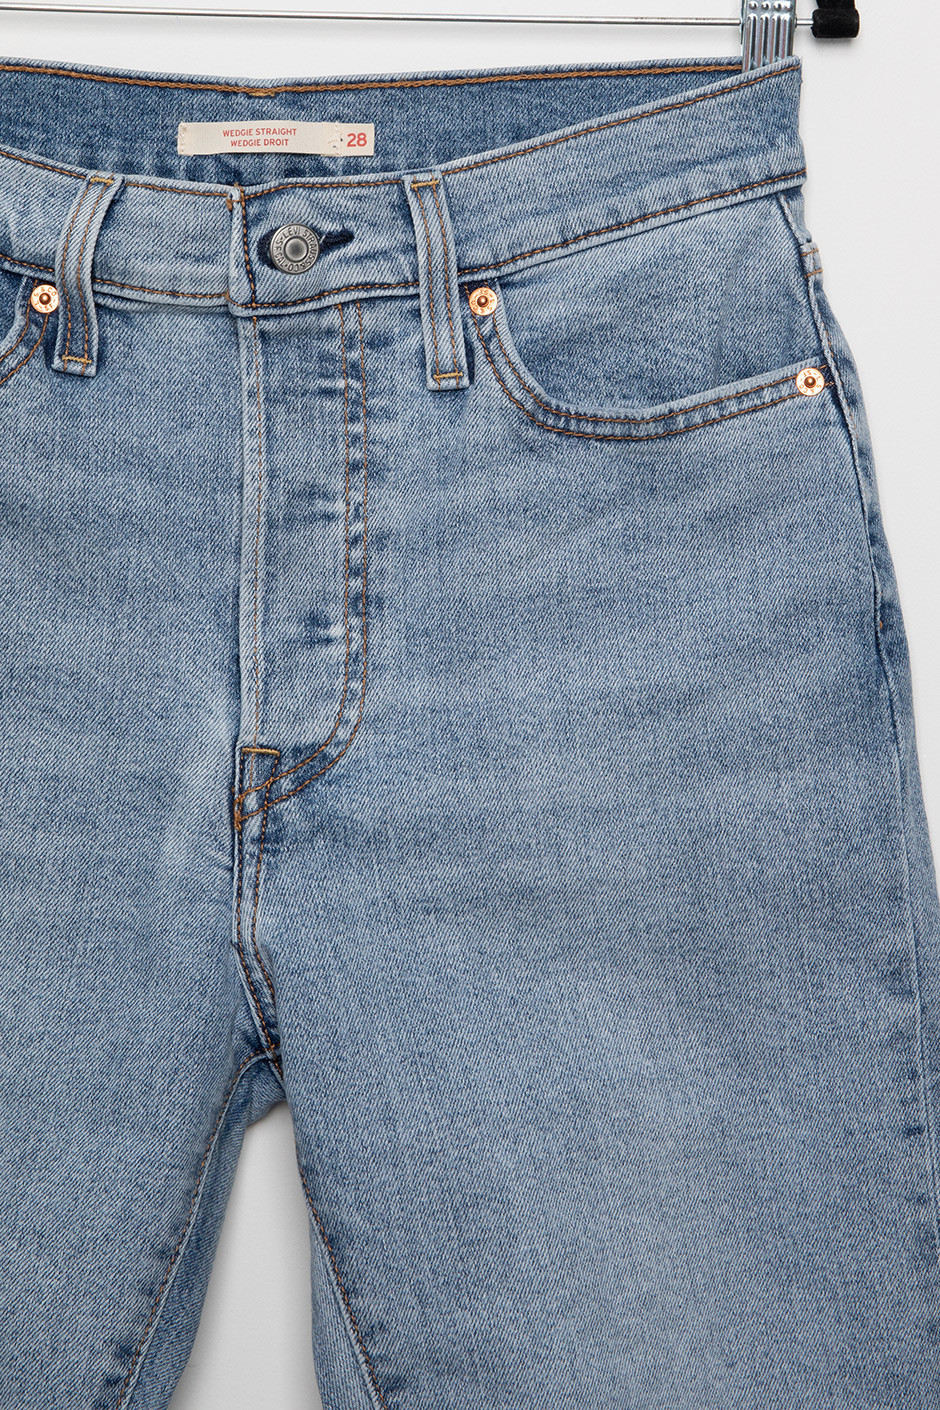 LEVI'S Wedgie Straight Leg Jeans | Silver Icing